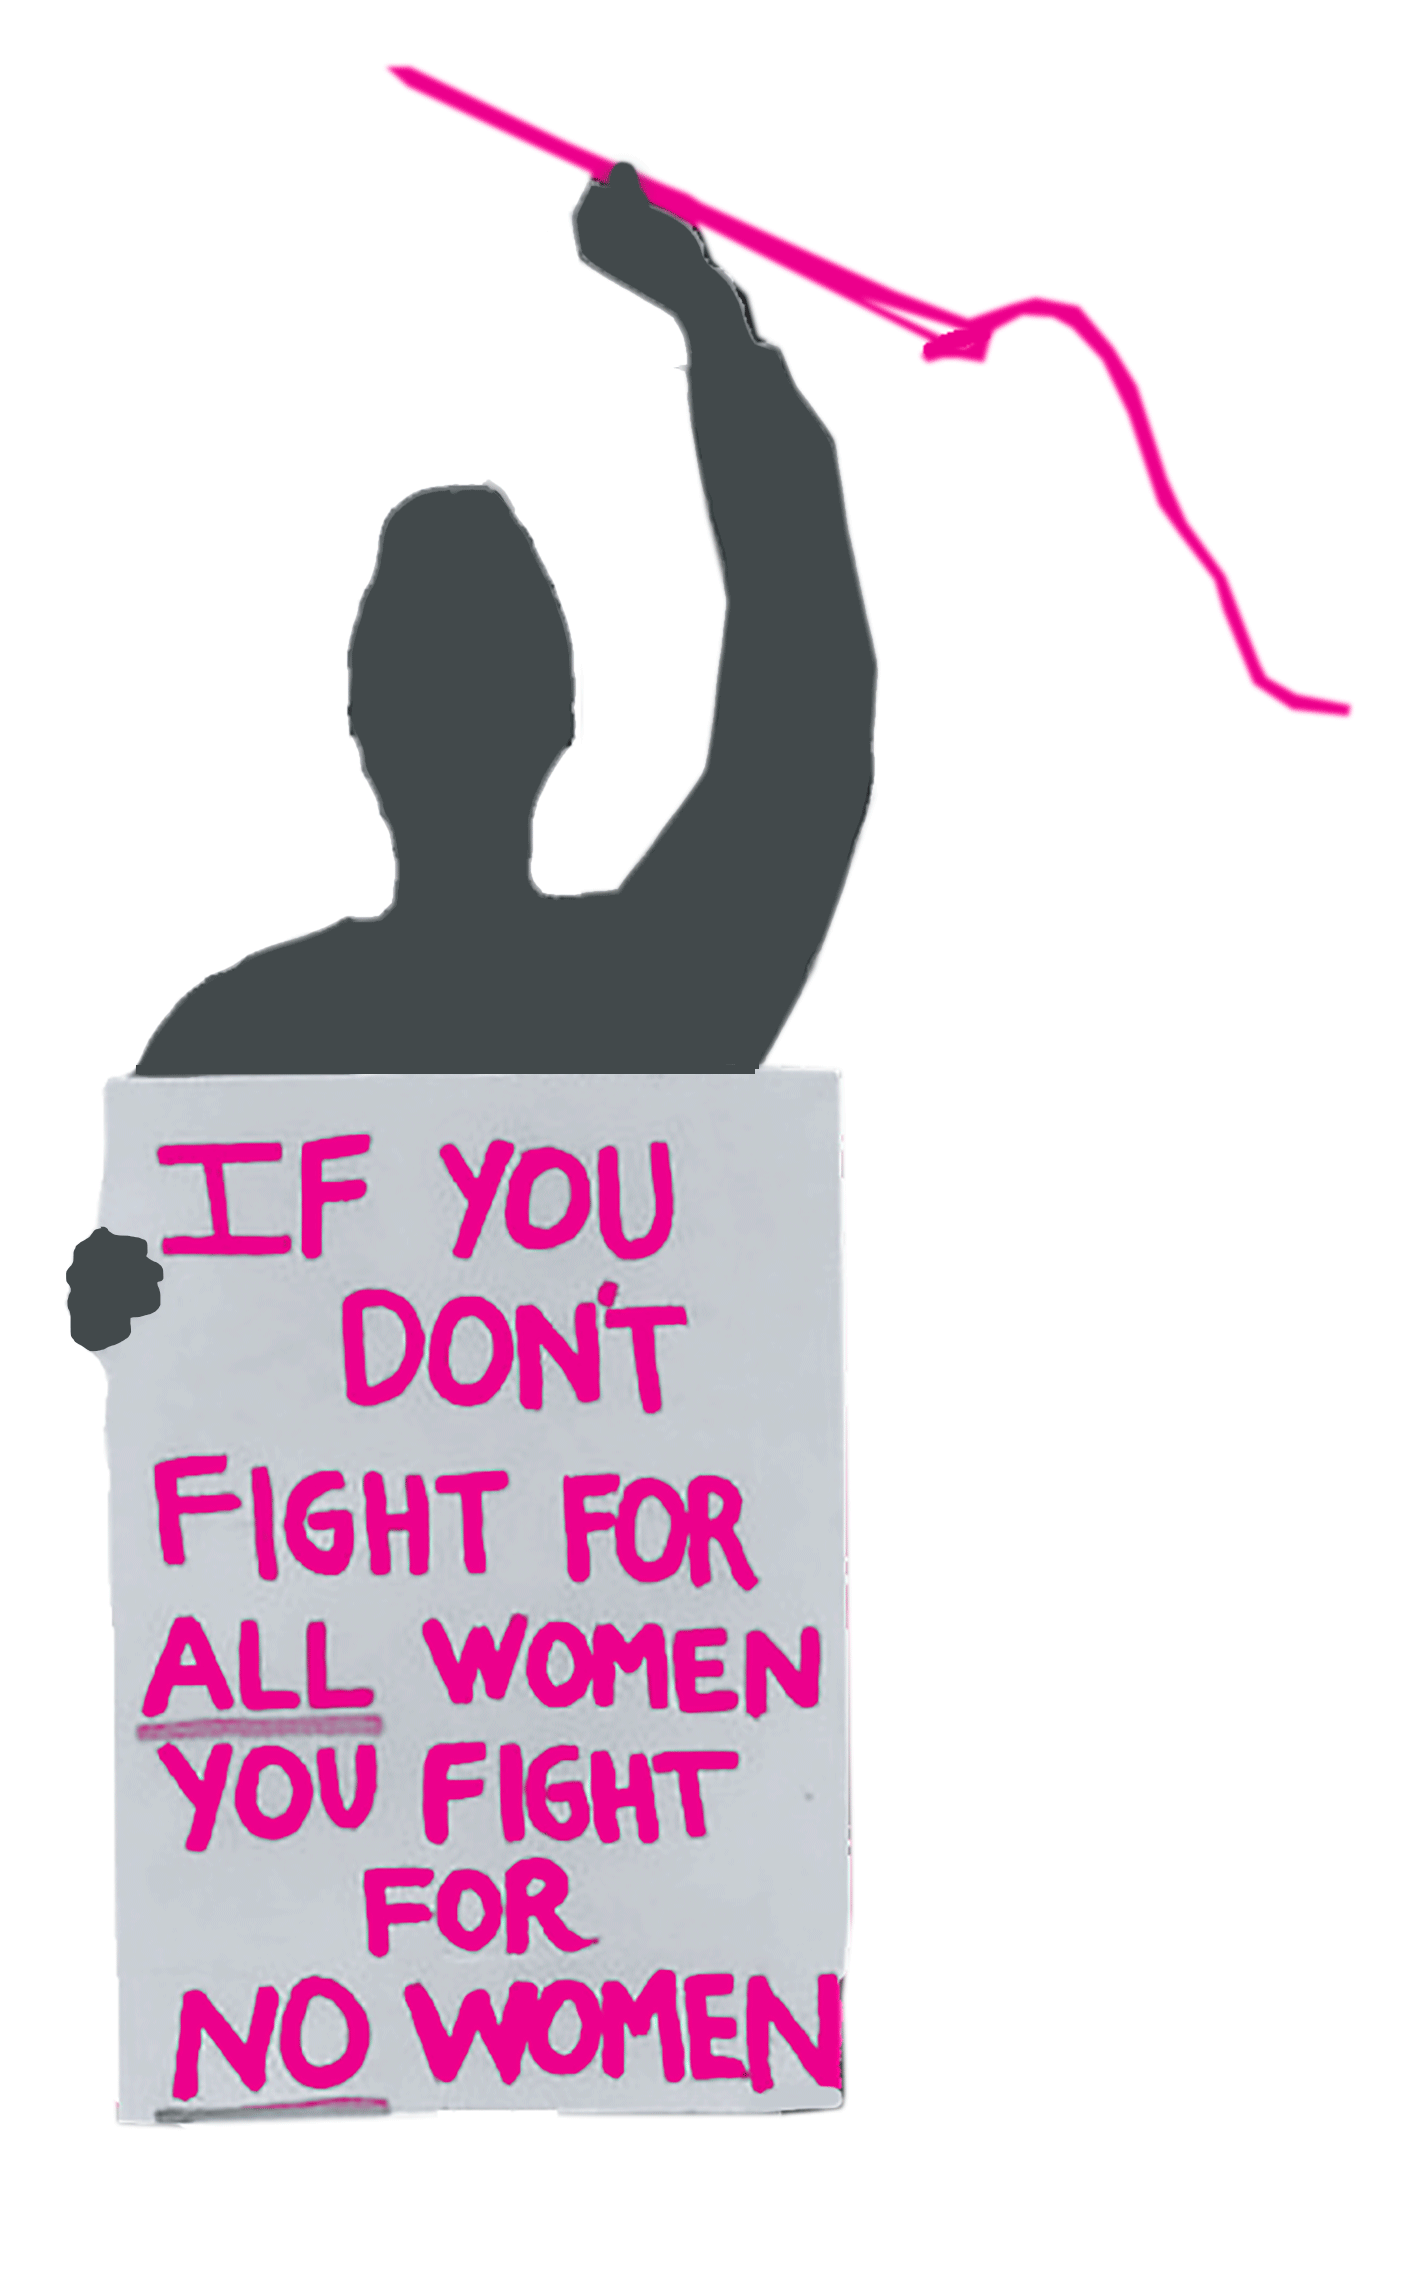 Riot Alliance's "If you Don't Fight for All Women"